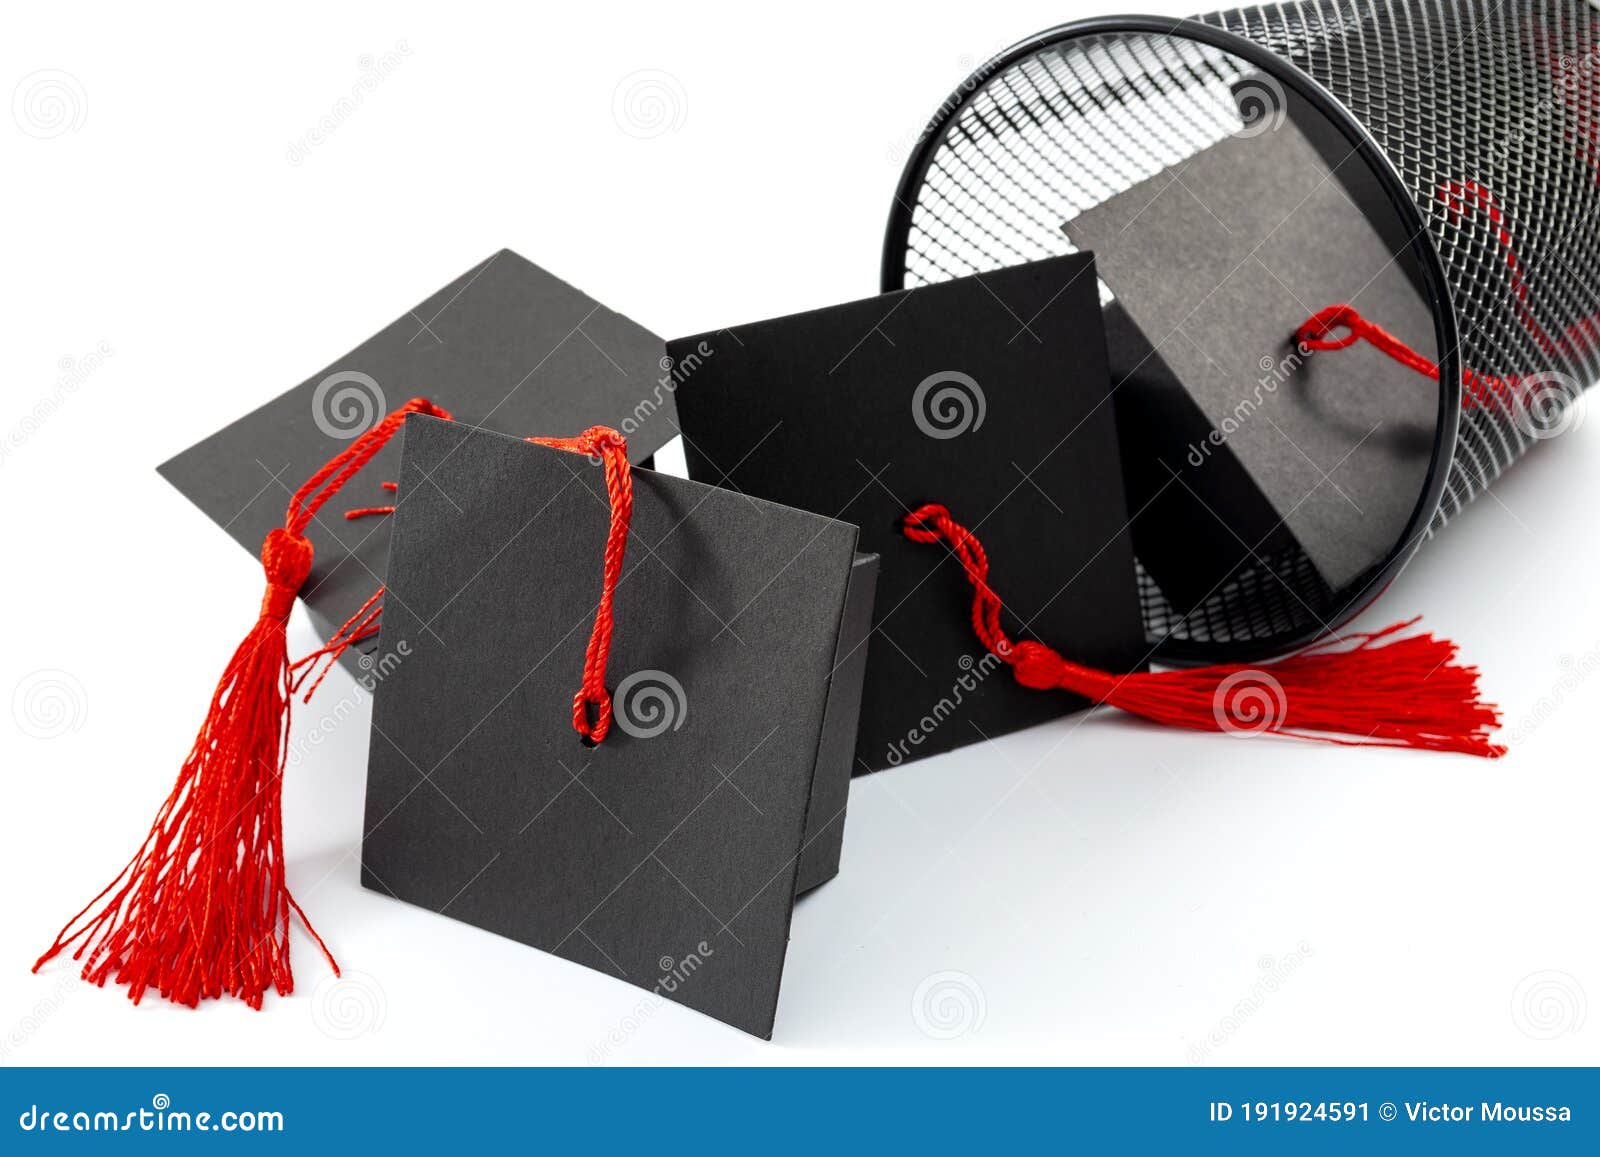 useless university degree and collage is a waste of time and money concept theme with numerous graduation caps falling out of a